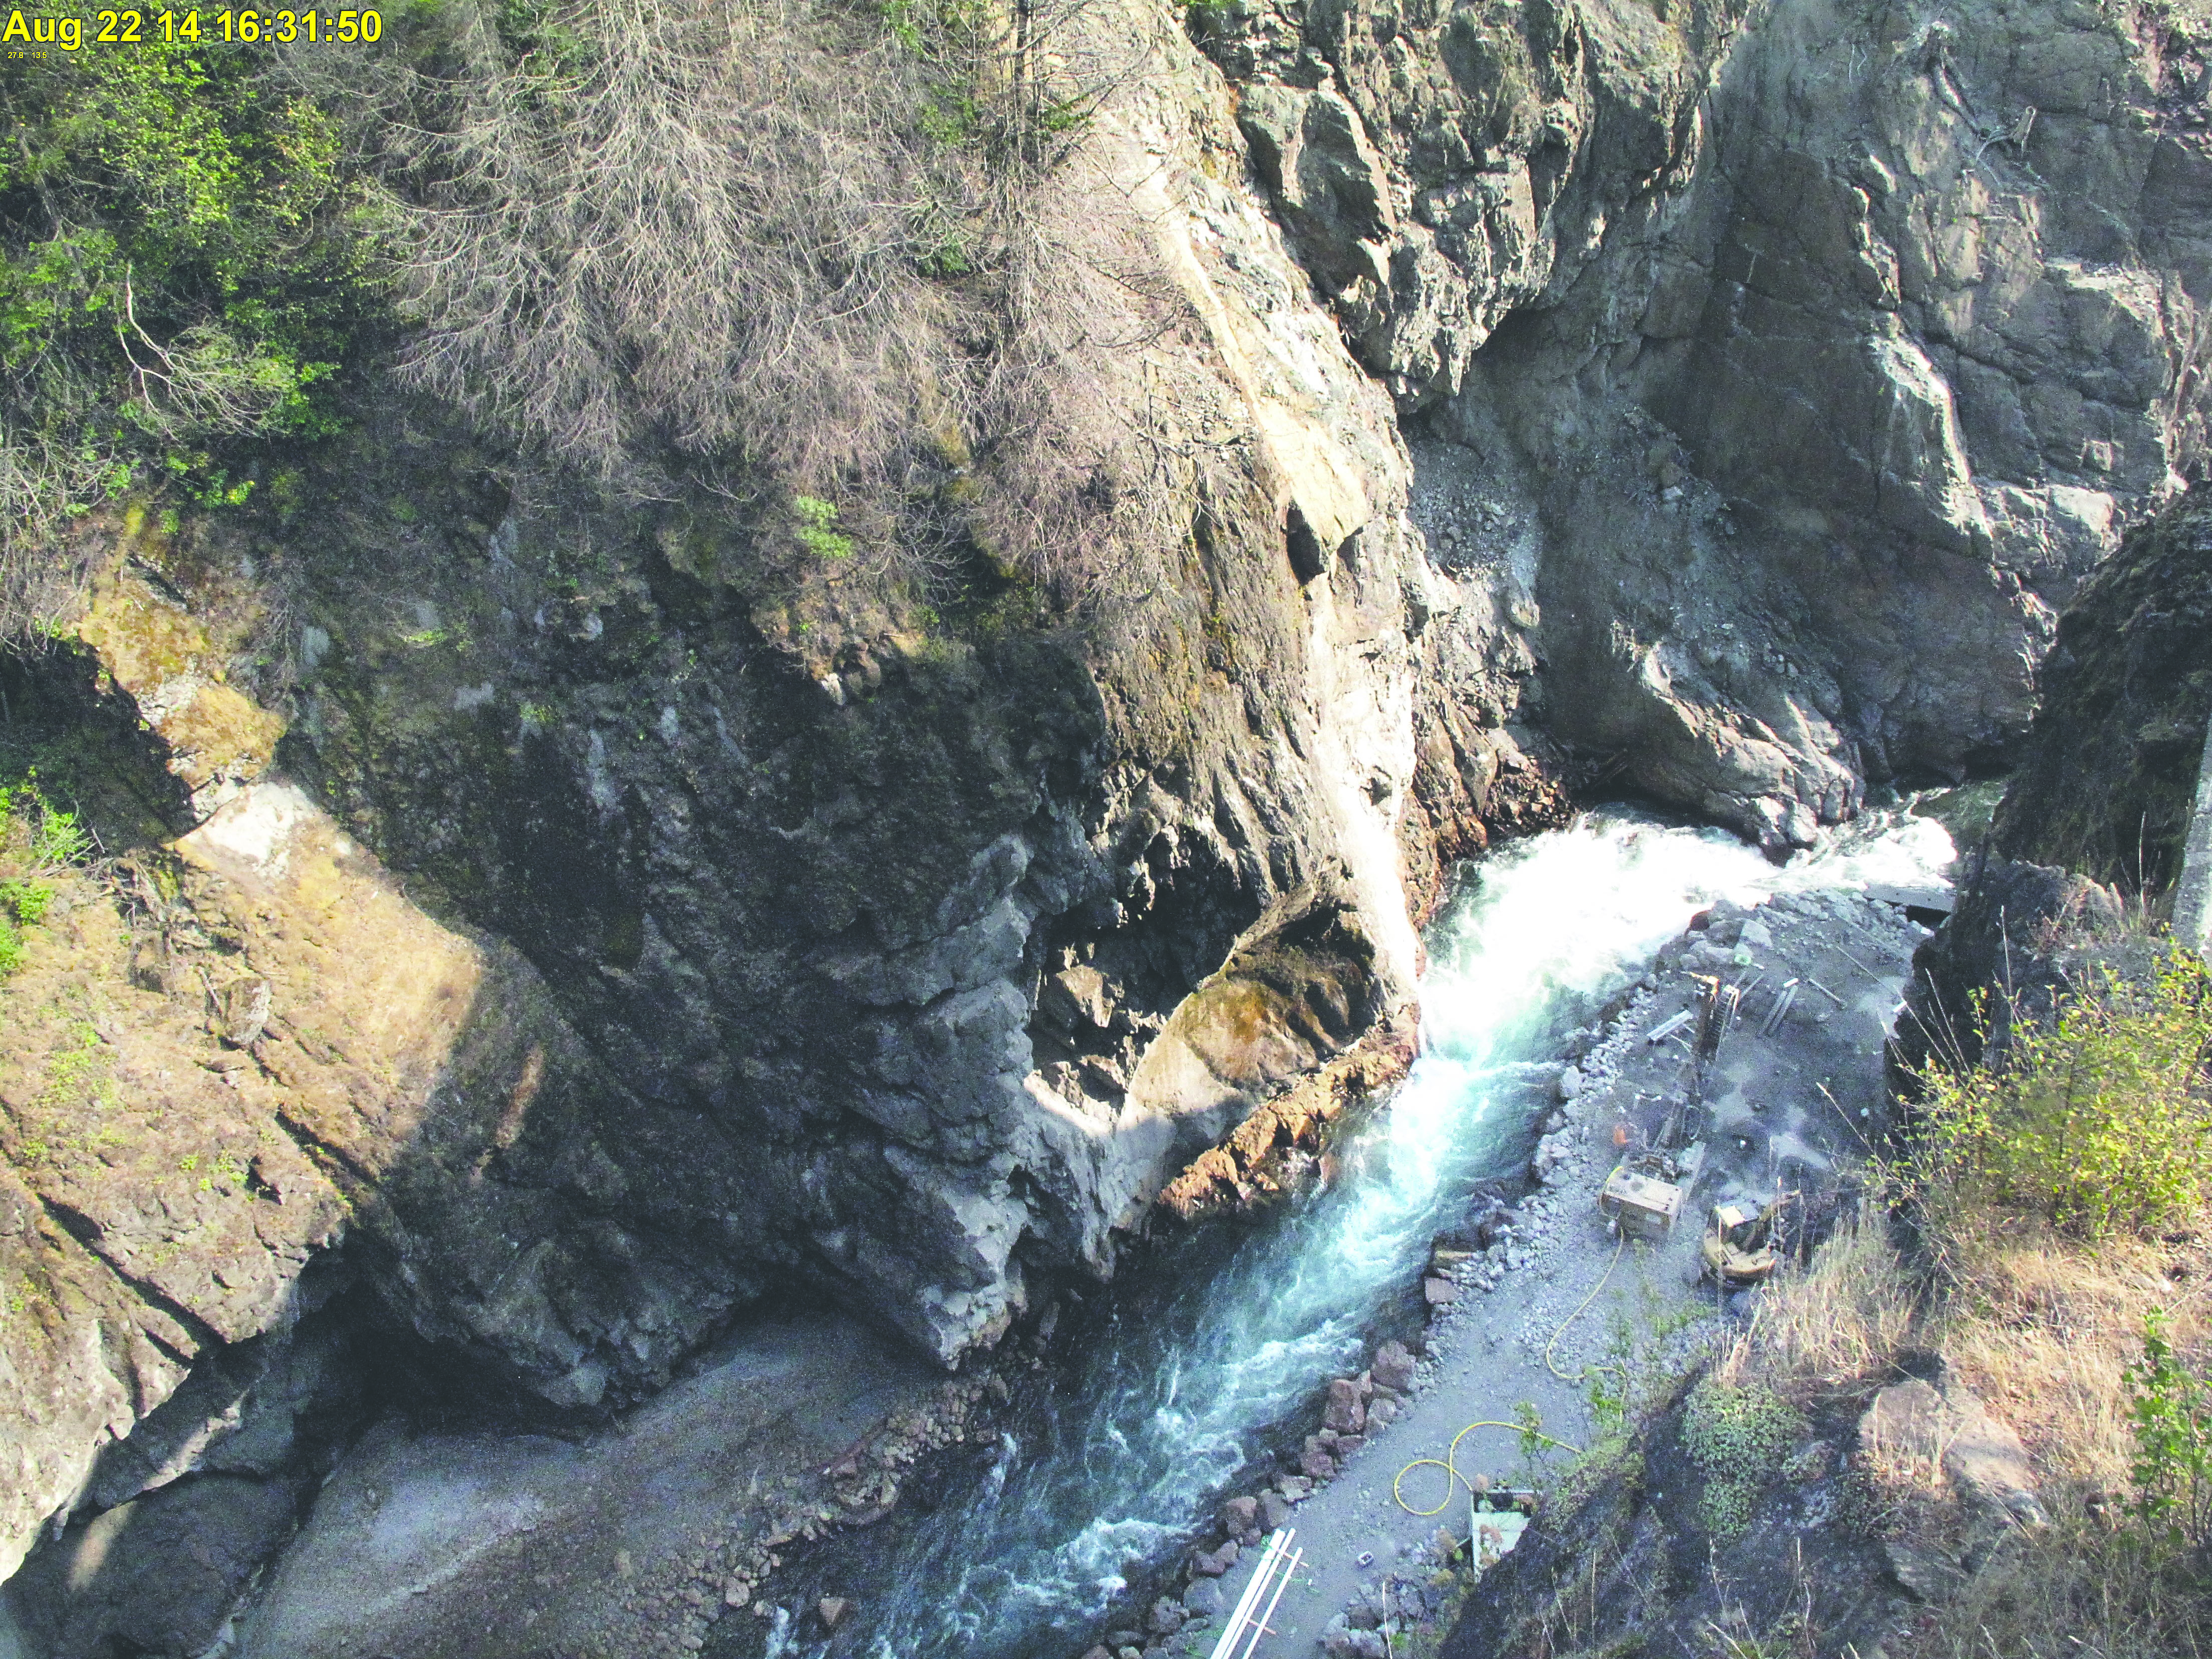 What remains of Glines Canyon Dam on the Elwha River is expected to be demolished this week. National Park Service